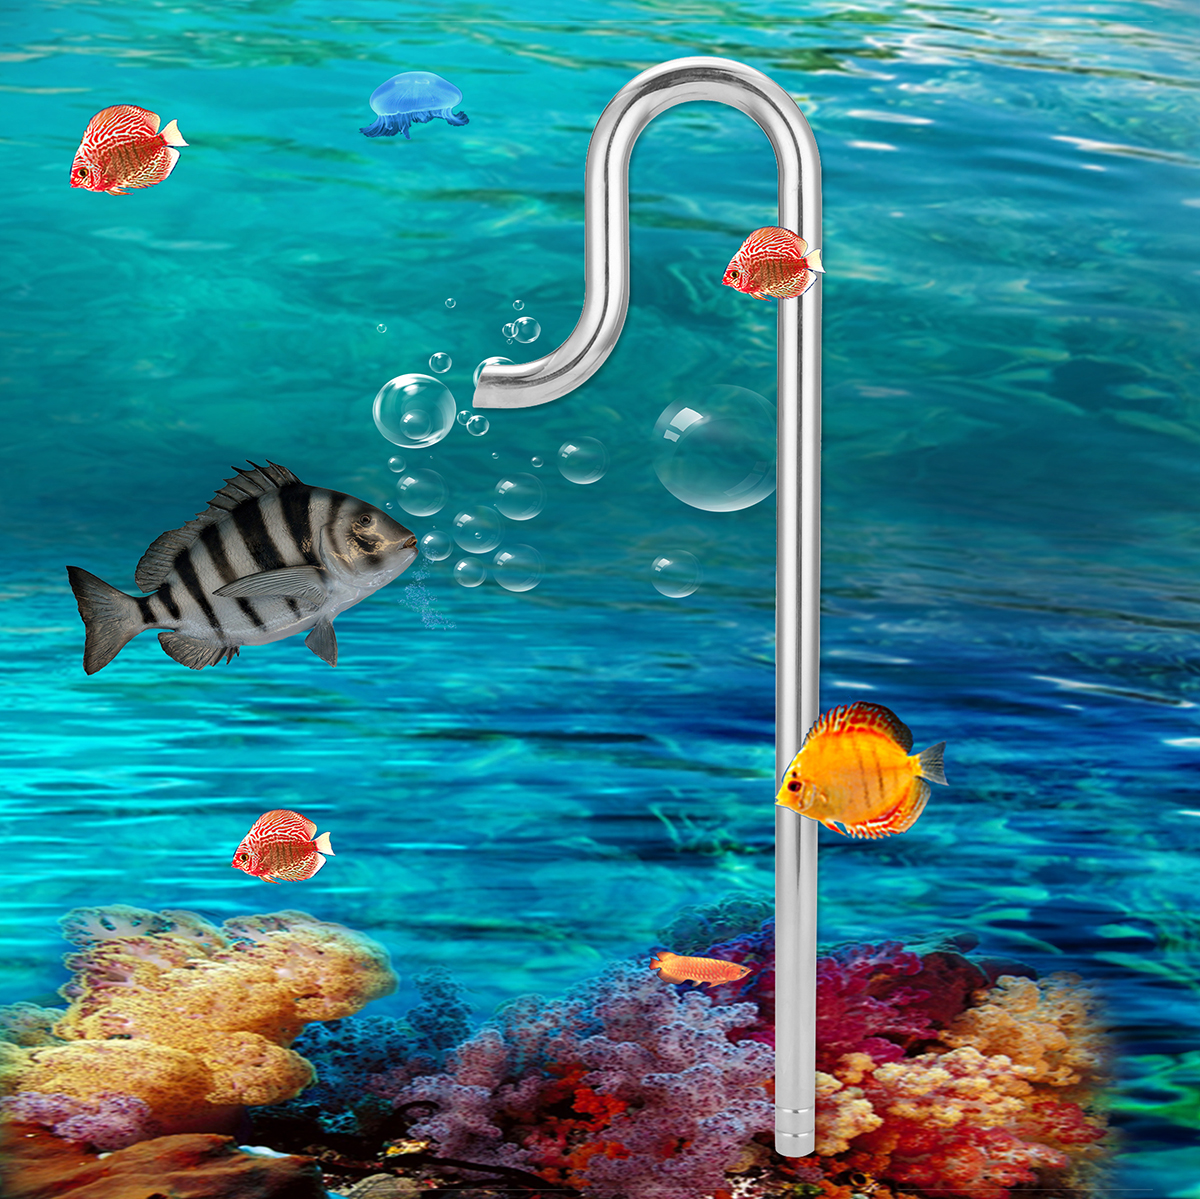 Aquarium-Water-Surface-Skimmer-Filter-Tube-Stainless-Steel-Inflow-Outflow-Water-Pipe-1312560-9